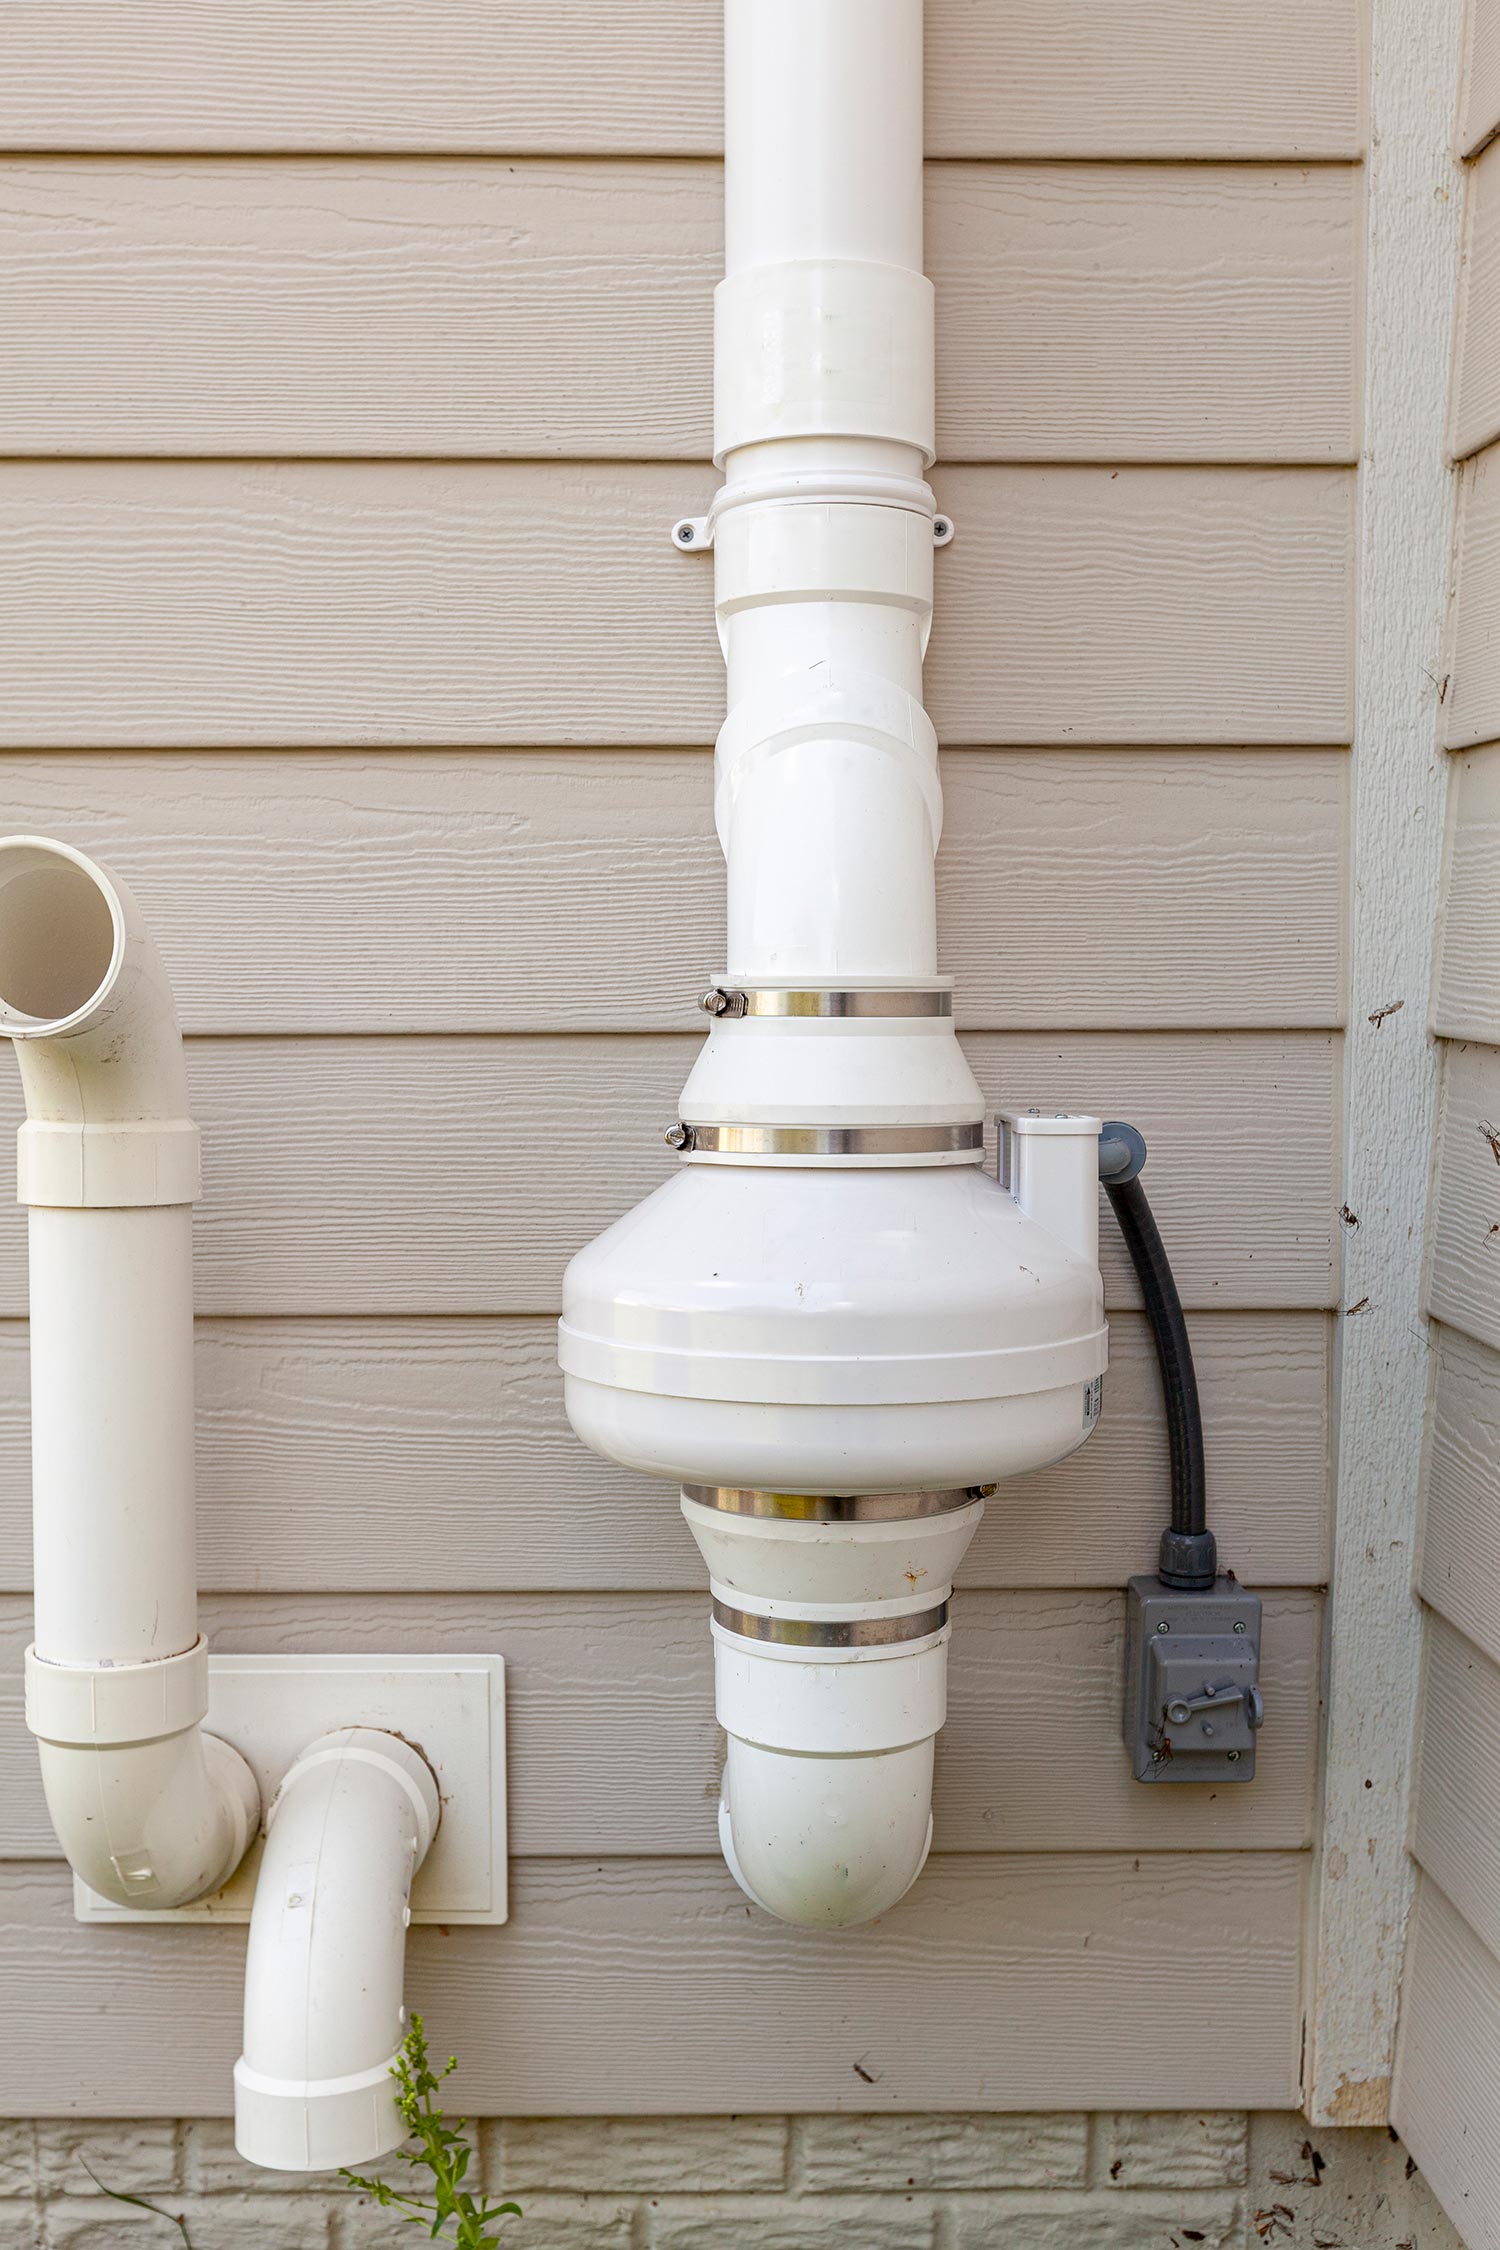 PVC pipes attached to the electrical motor of a residential radon mitigation system